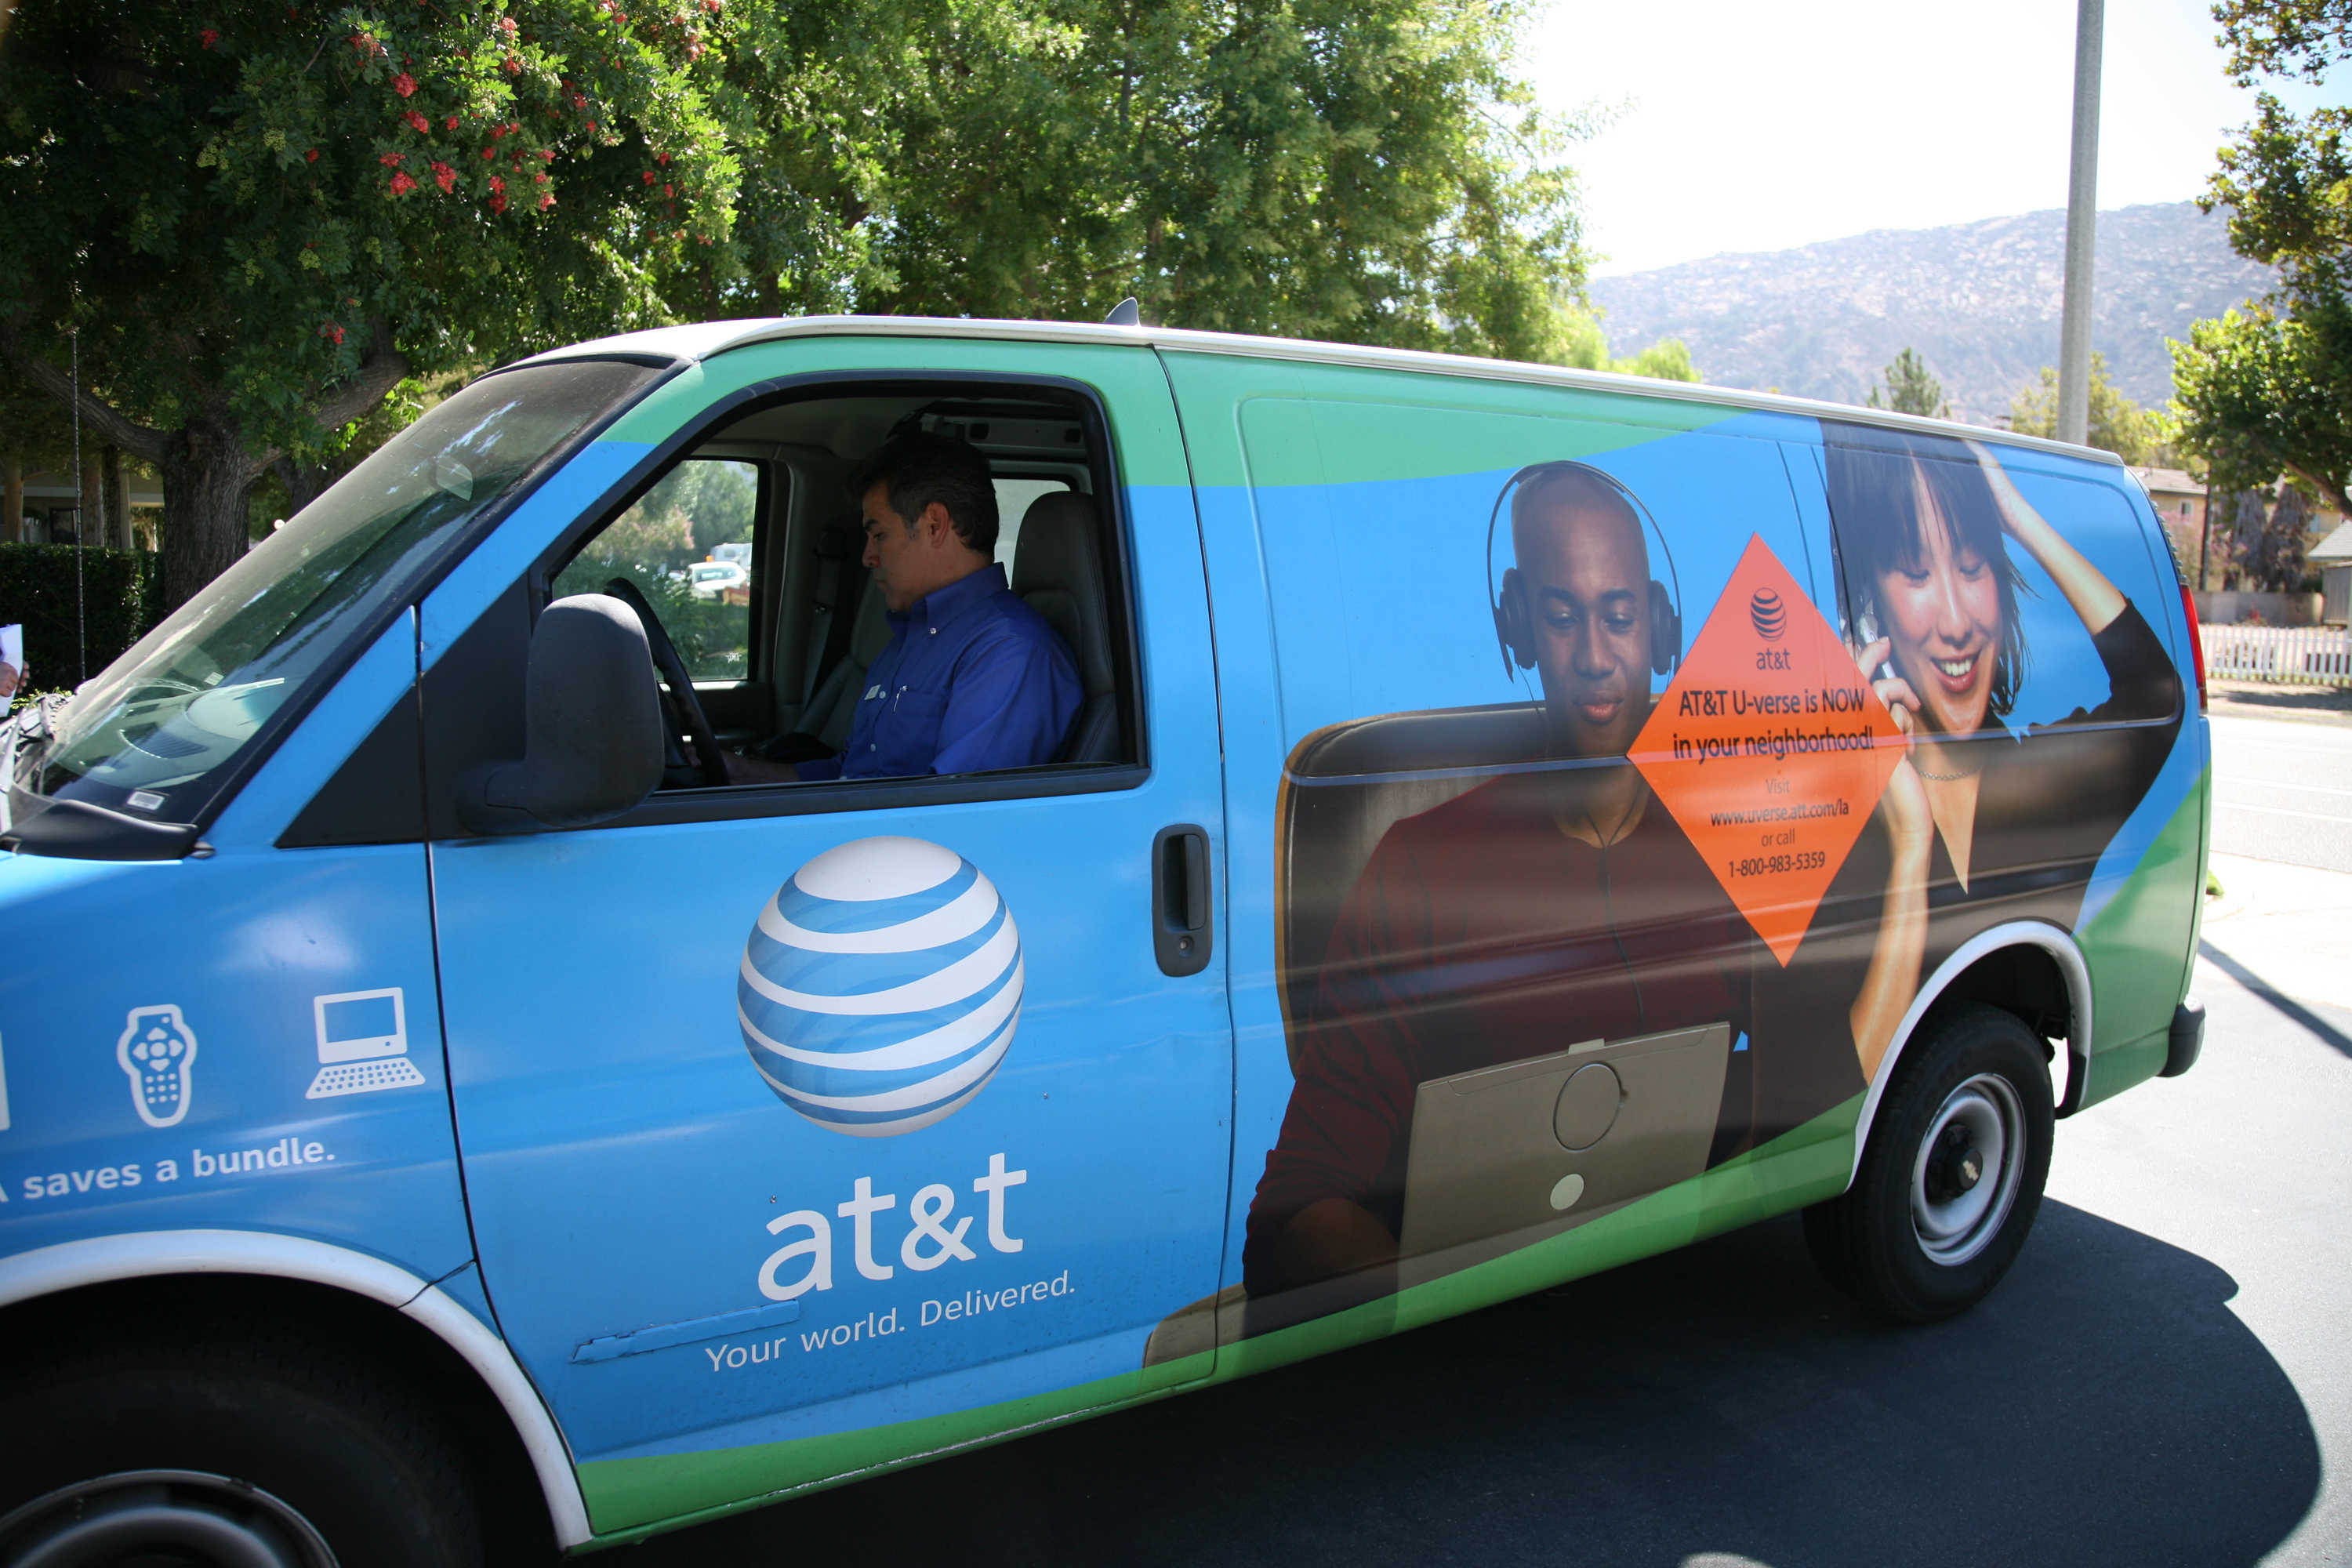 Stop the Cap! » Louisville, Kentucky Says Hello to Cable Competition from AT&T U-verse, But Long